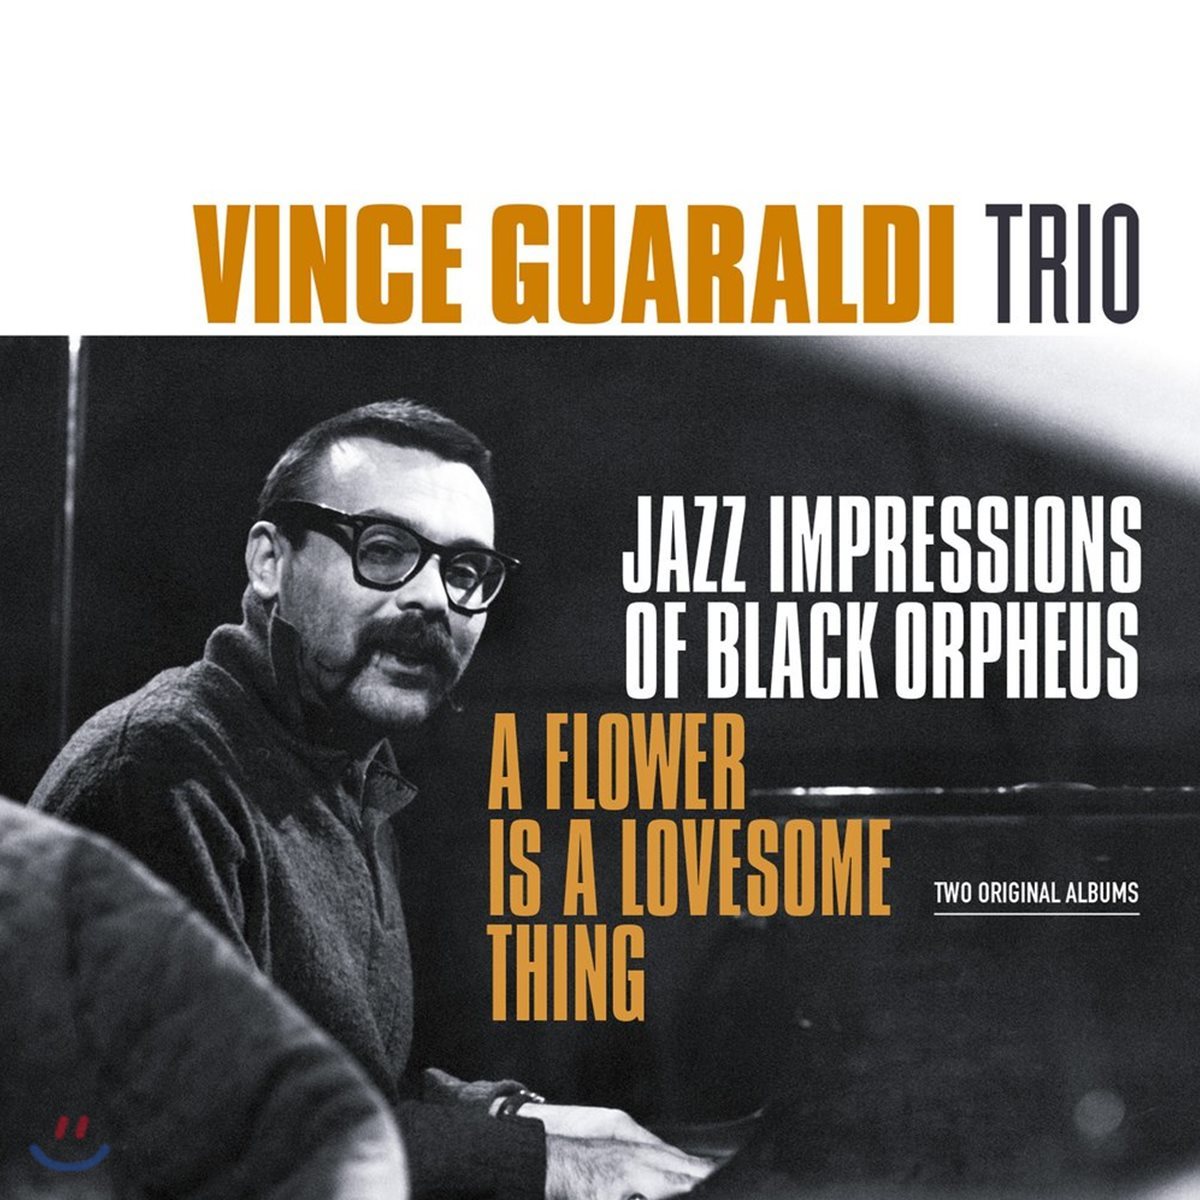 Vince Guaraldi Trio (빈스 과랄디 트리오) - Flower Is A Lovesome Thing / Jazz Impressions of Black Orpheus [2 LP]